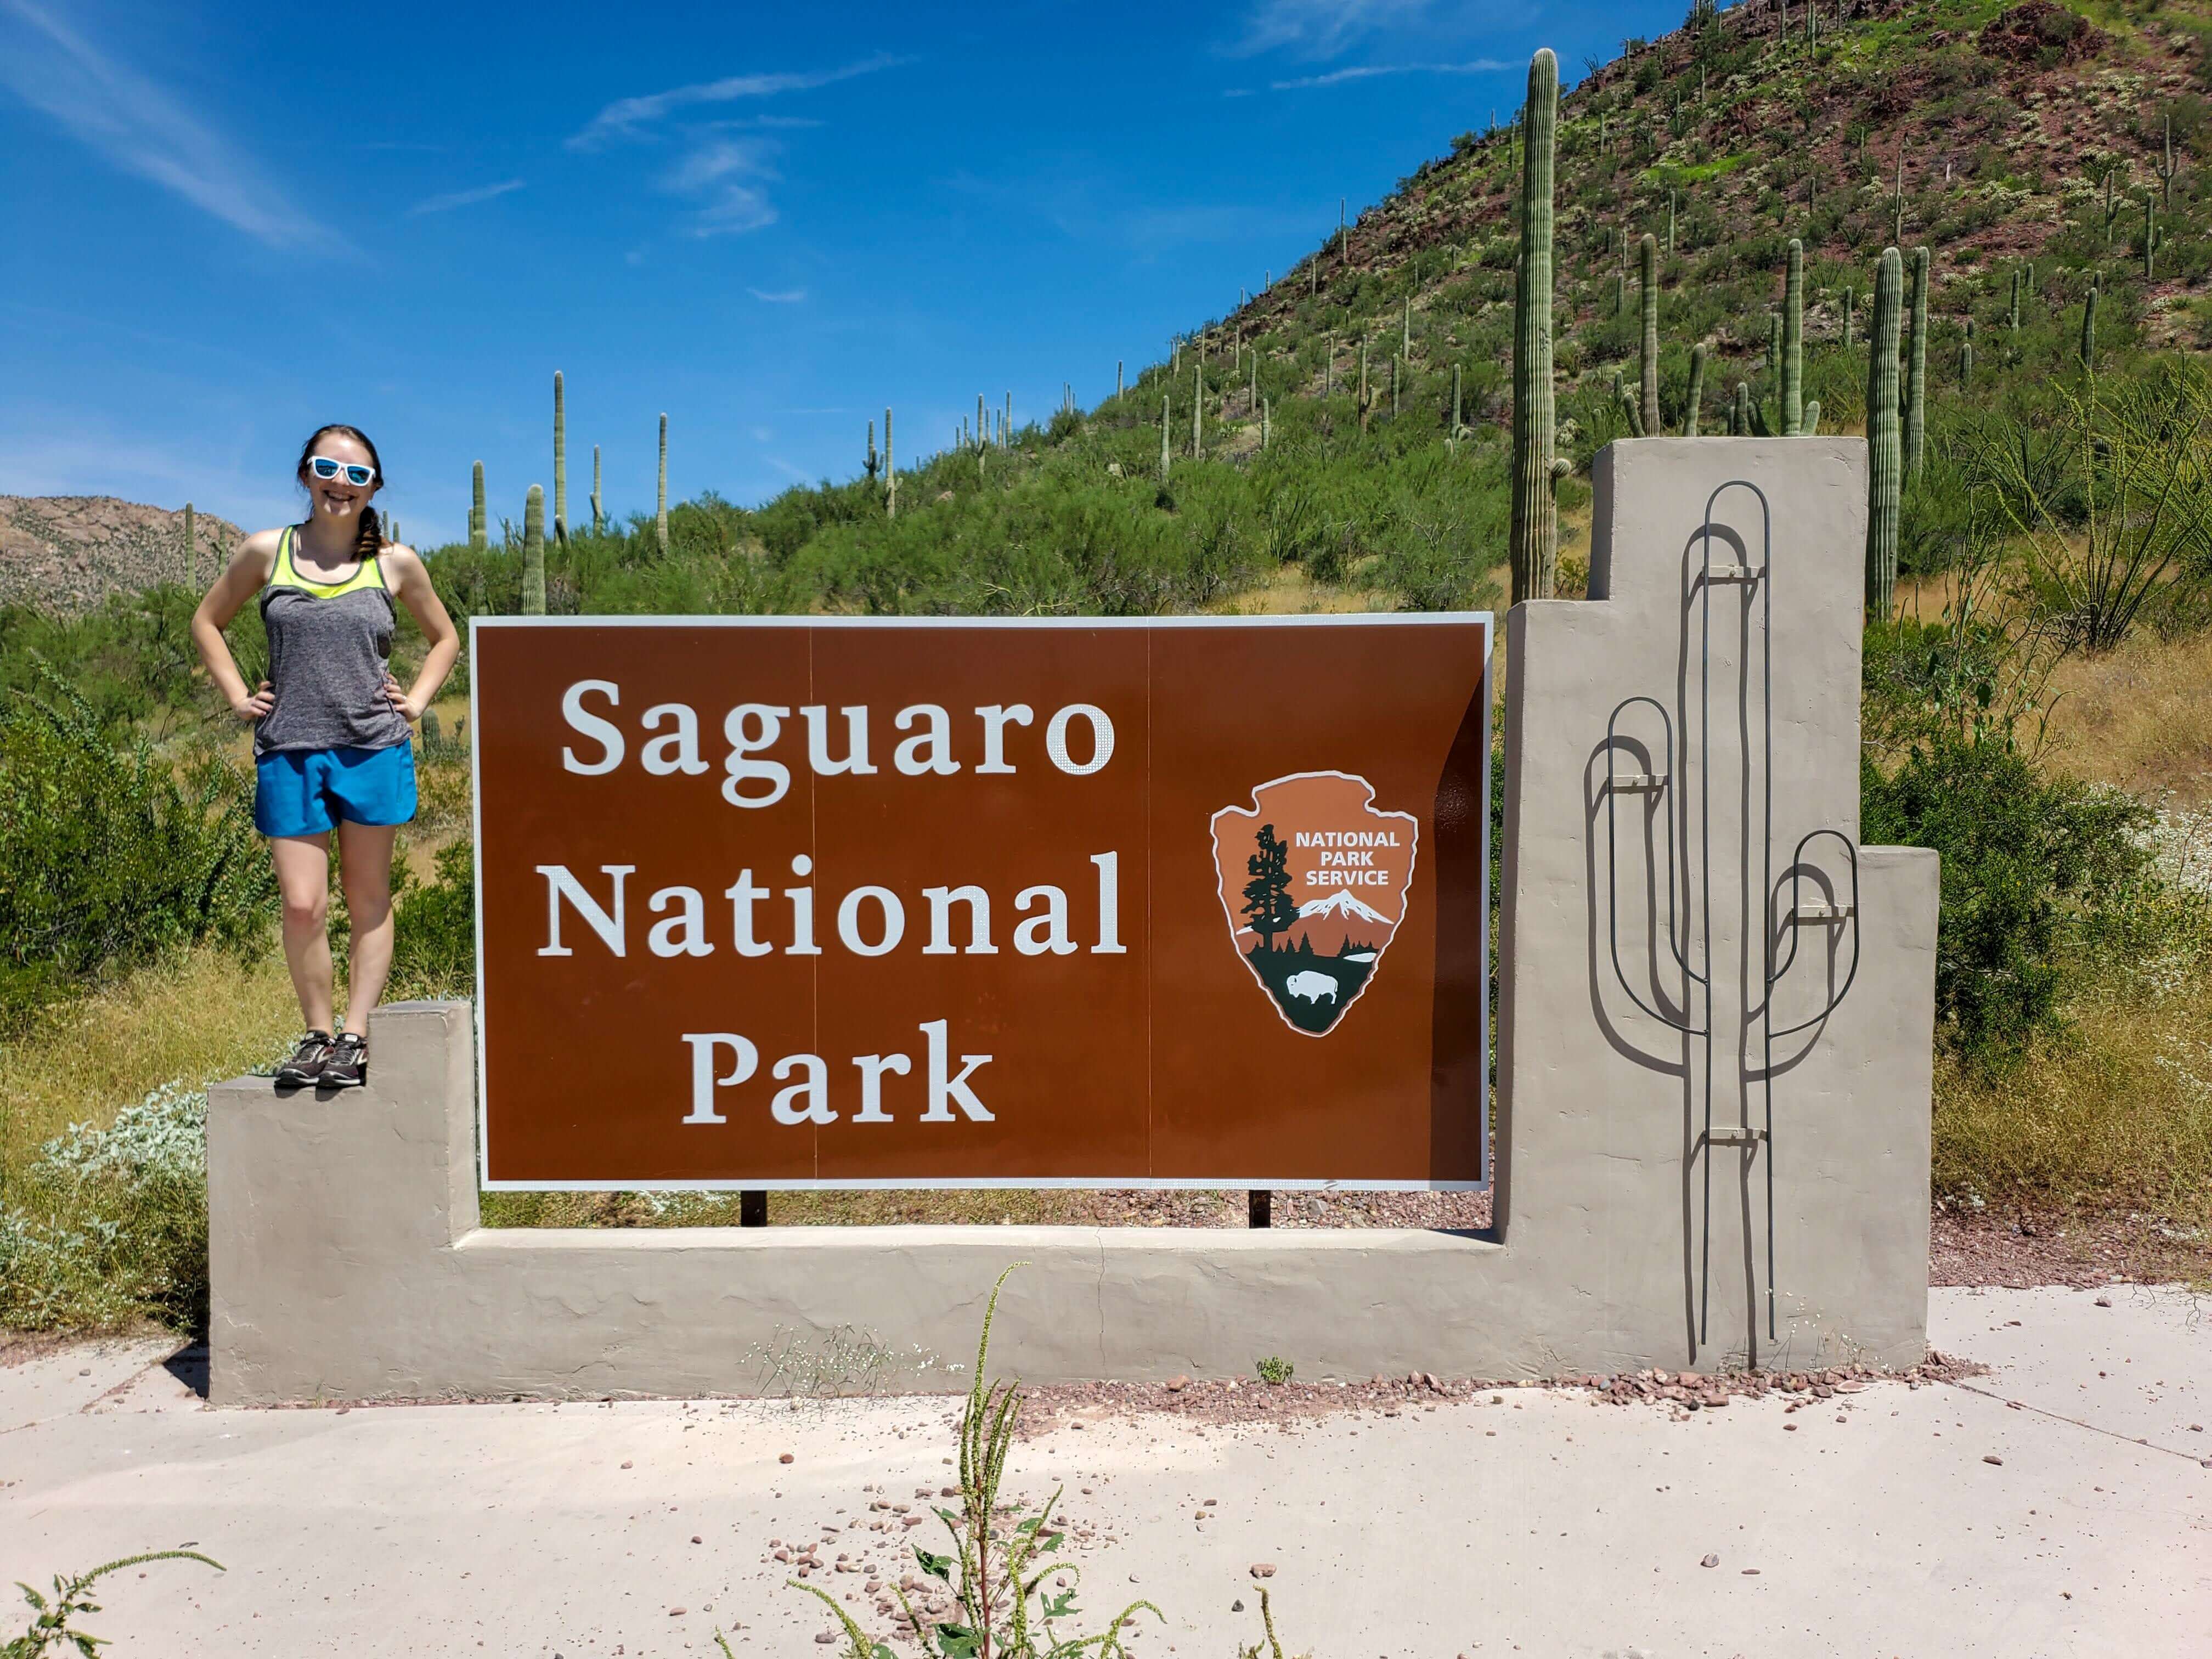 The Complete Guide To Saguaro National Park